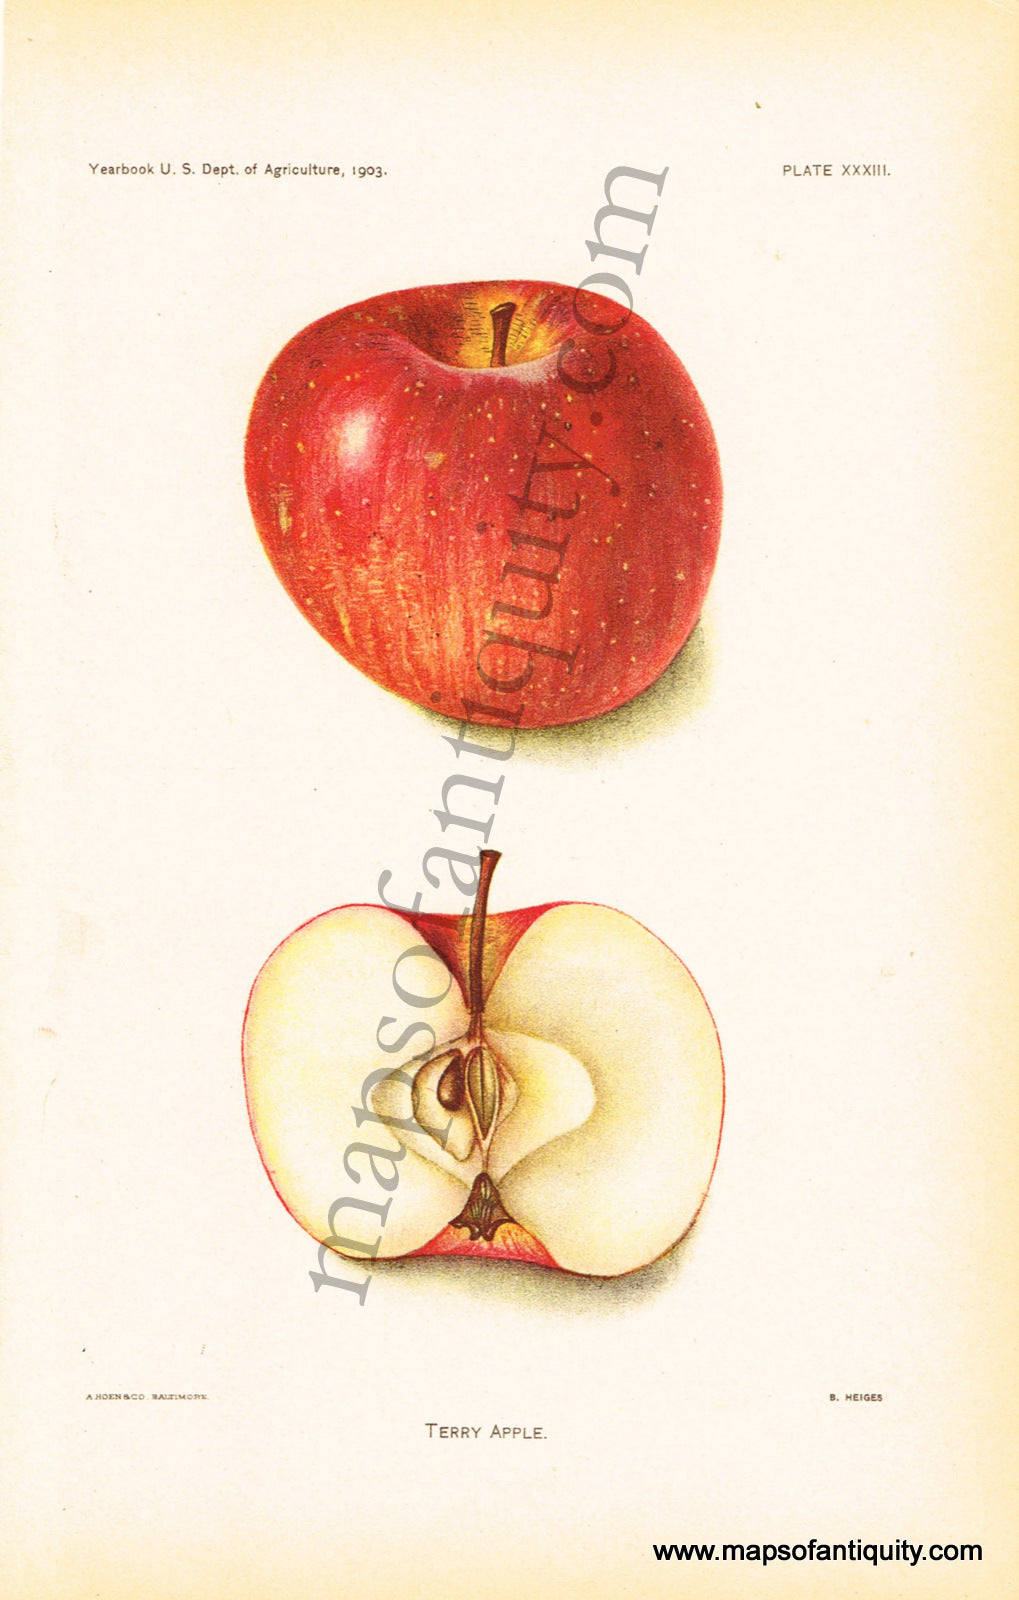 Antique-Chromolithograph-Print-Terry-Apple-Antique-Prints-Natural-History-Fruit-1903-B.-Heiges-Maps-Of-Antiquity